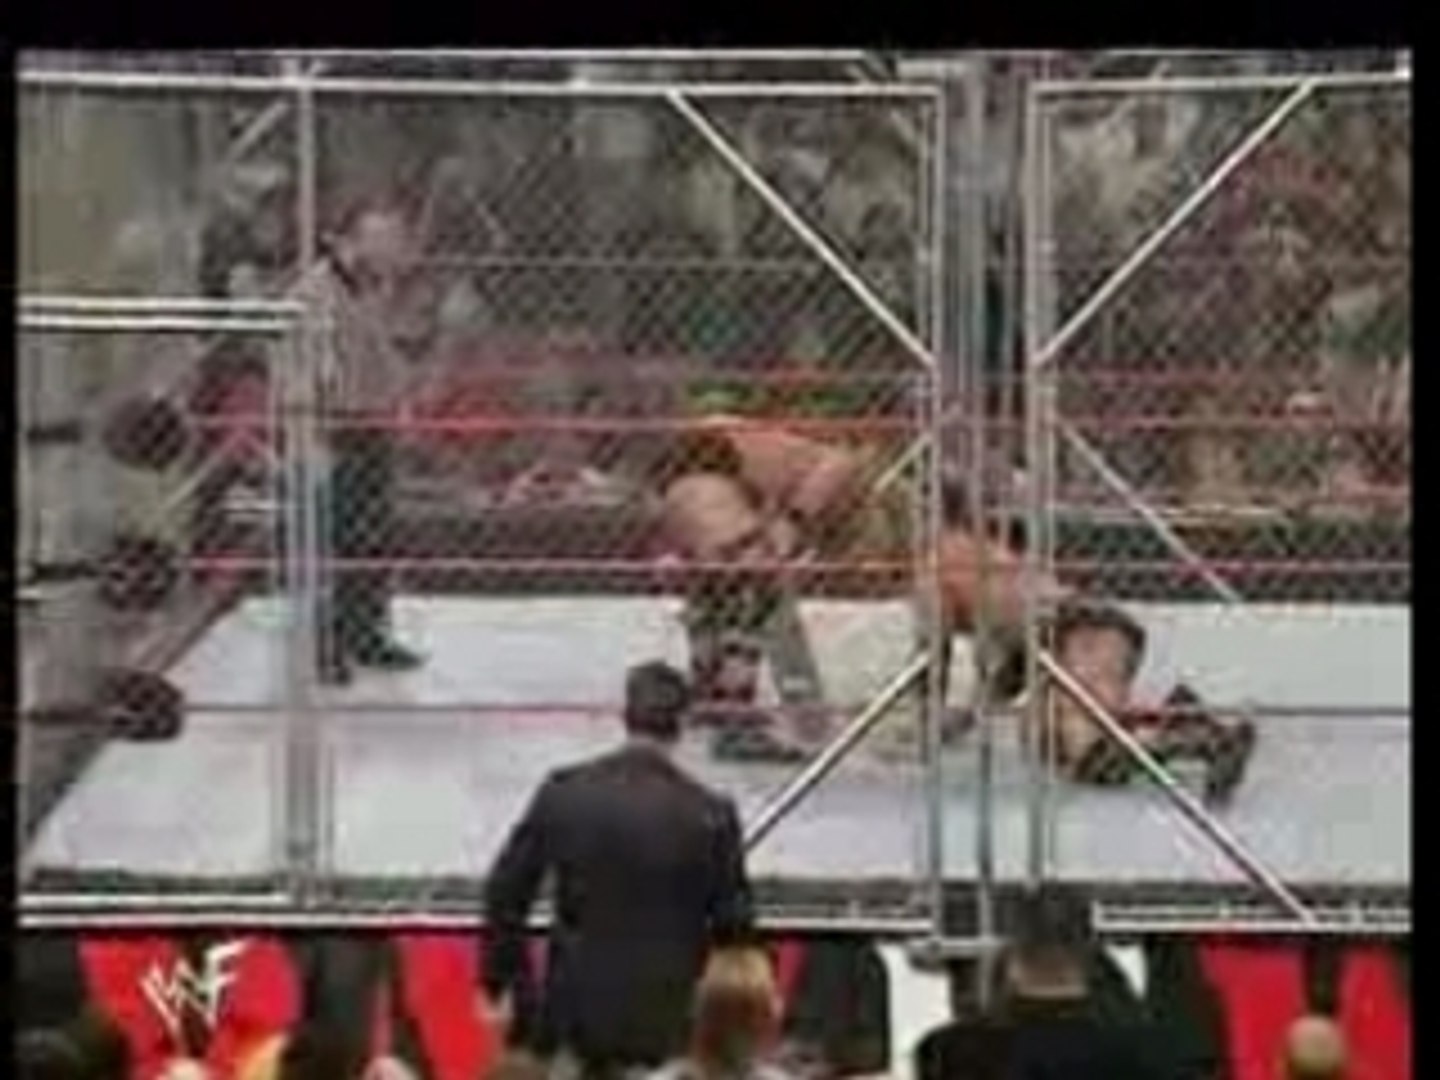 steve austin vs the rock steel cage match - video Dailymotion